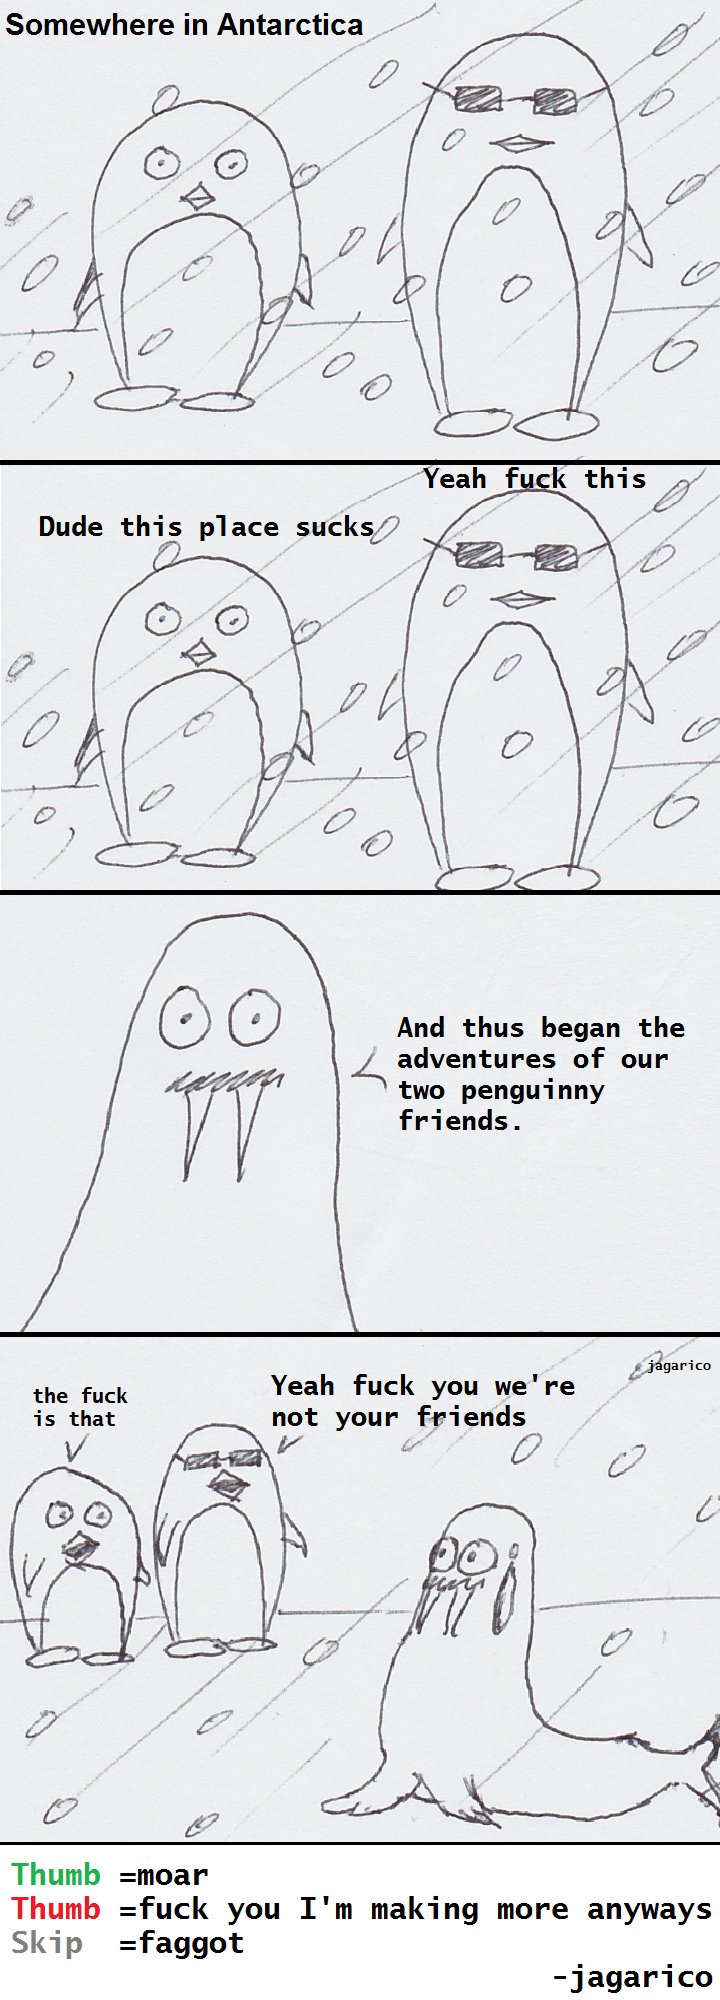 The travels of penguin 1